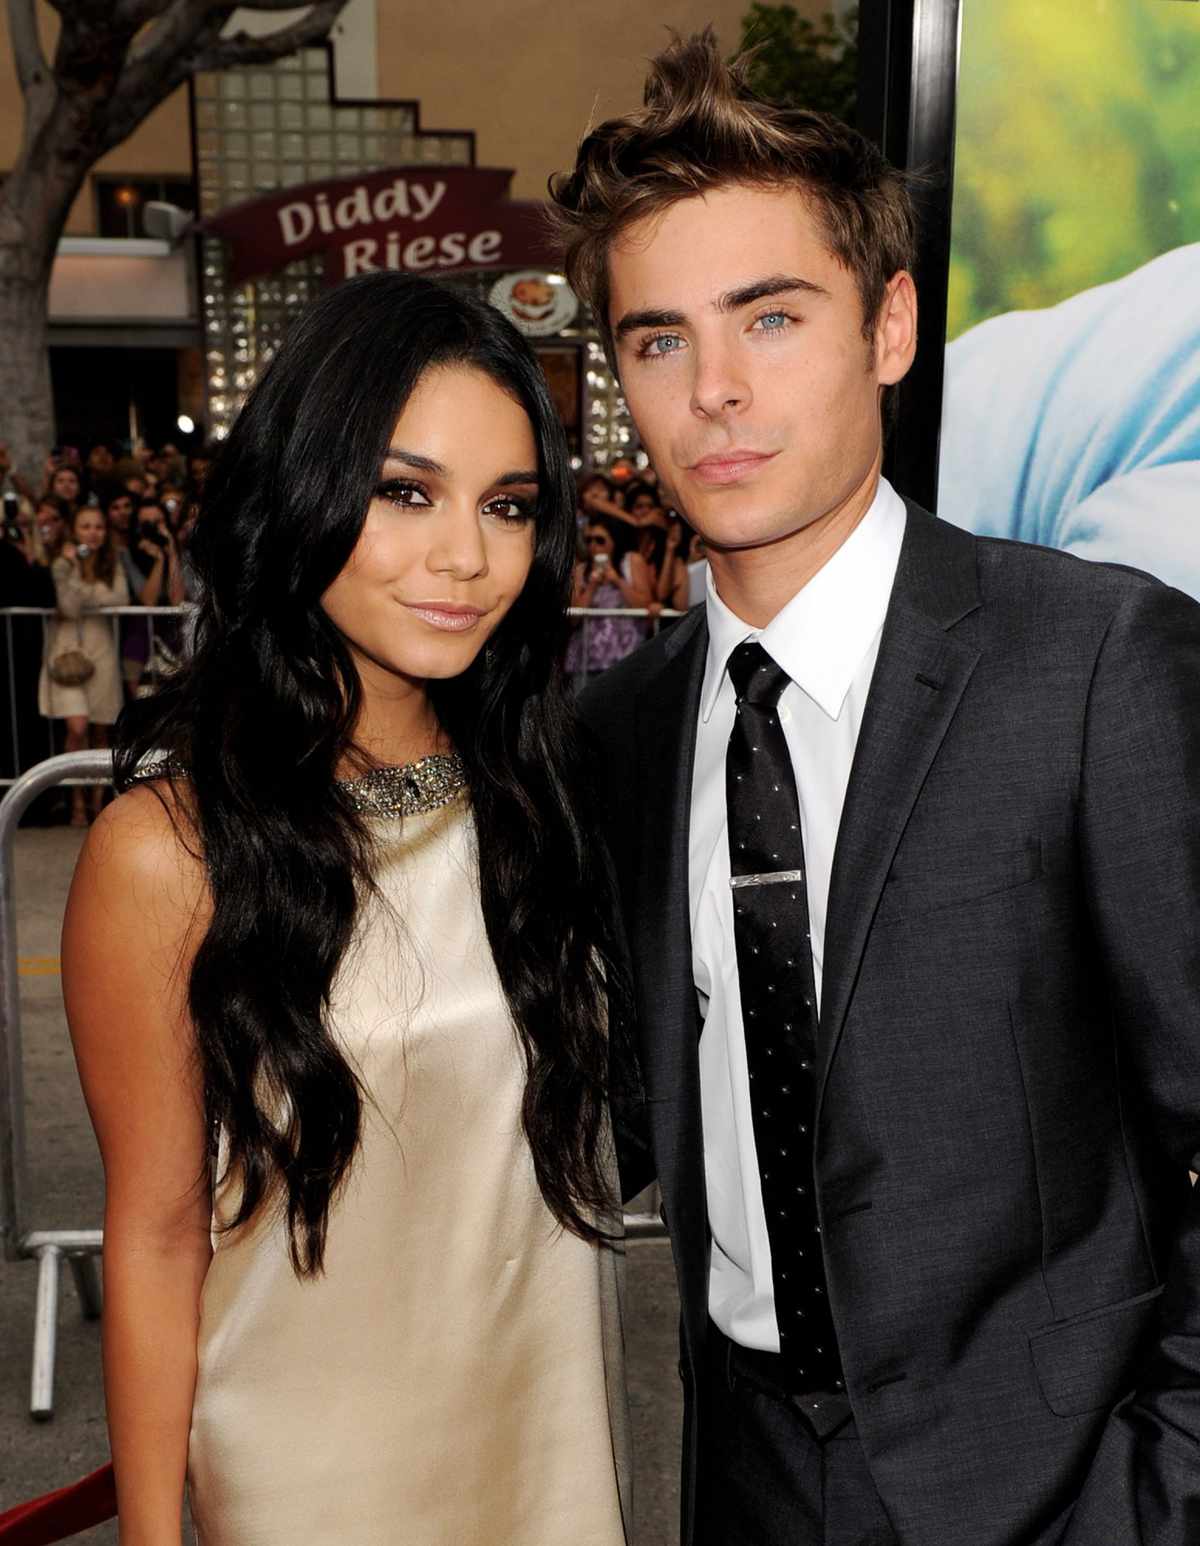 Is zac efron married